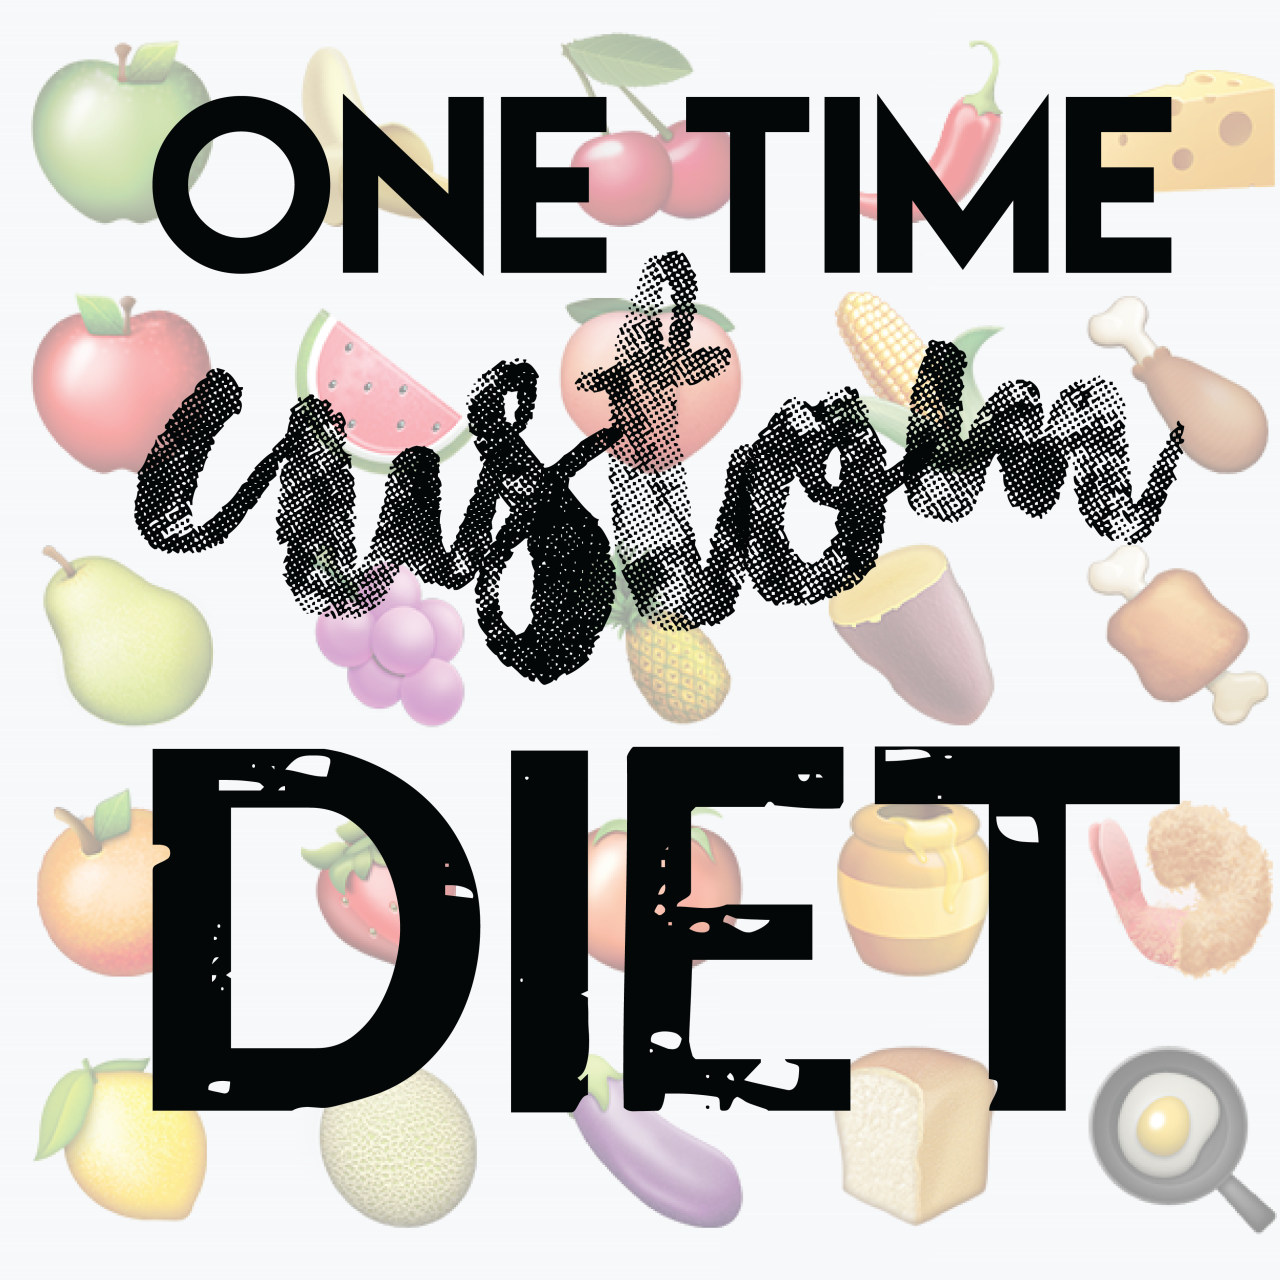 nutrition clipart nutrition fitness